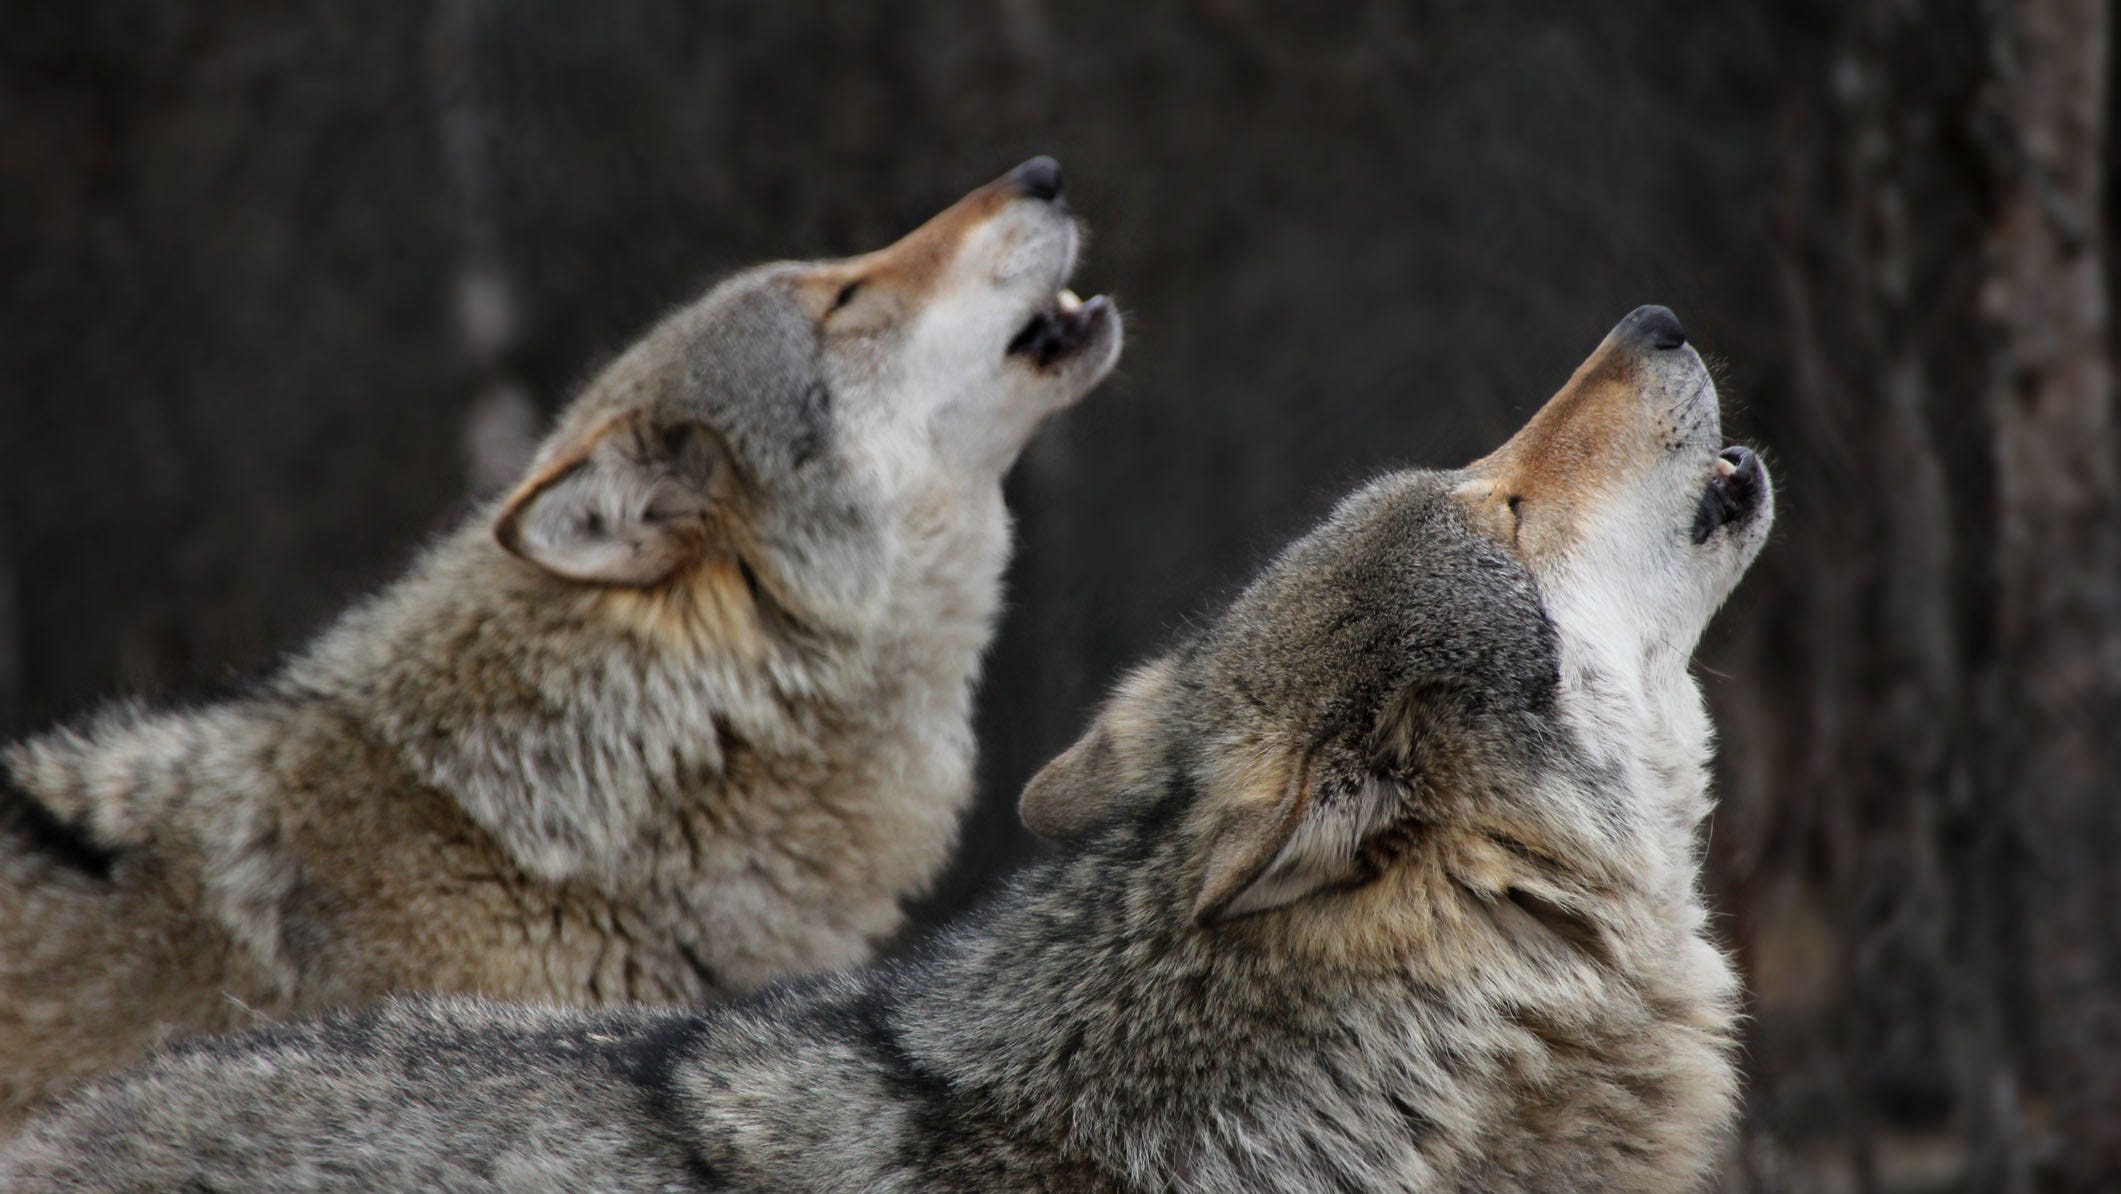 Washington state to kill up to 2 wolves in response to attacks on calves